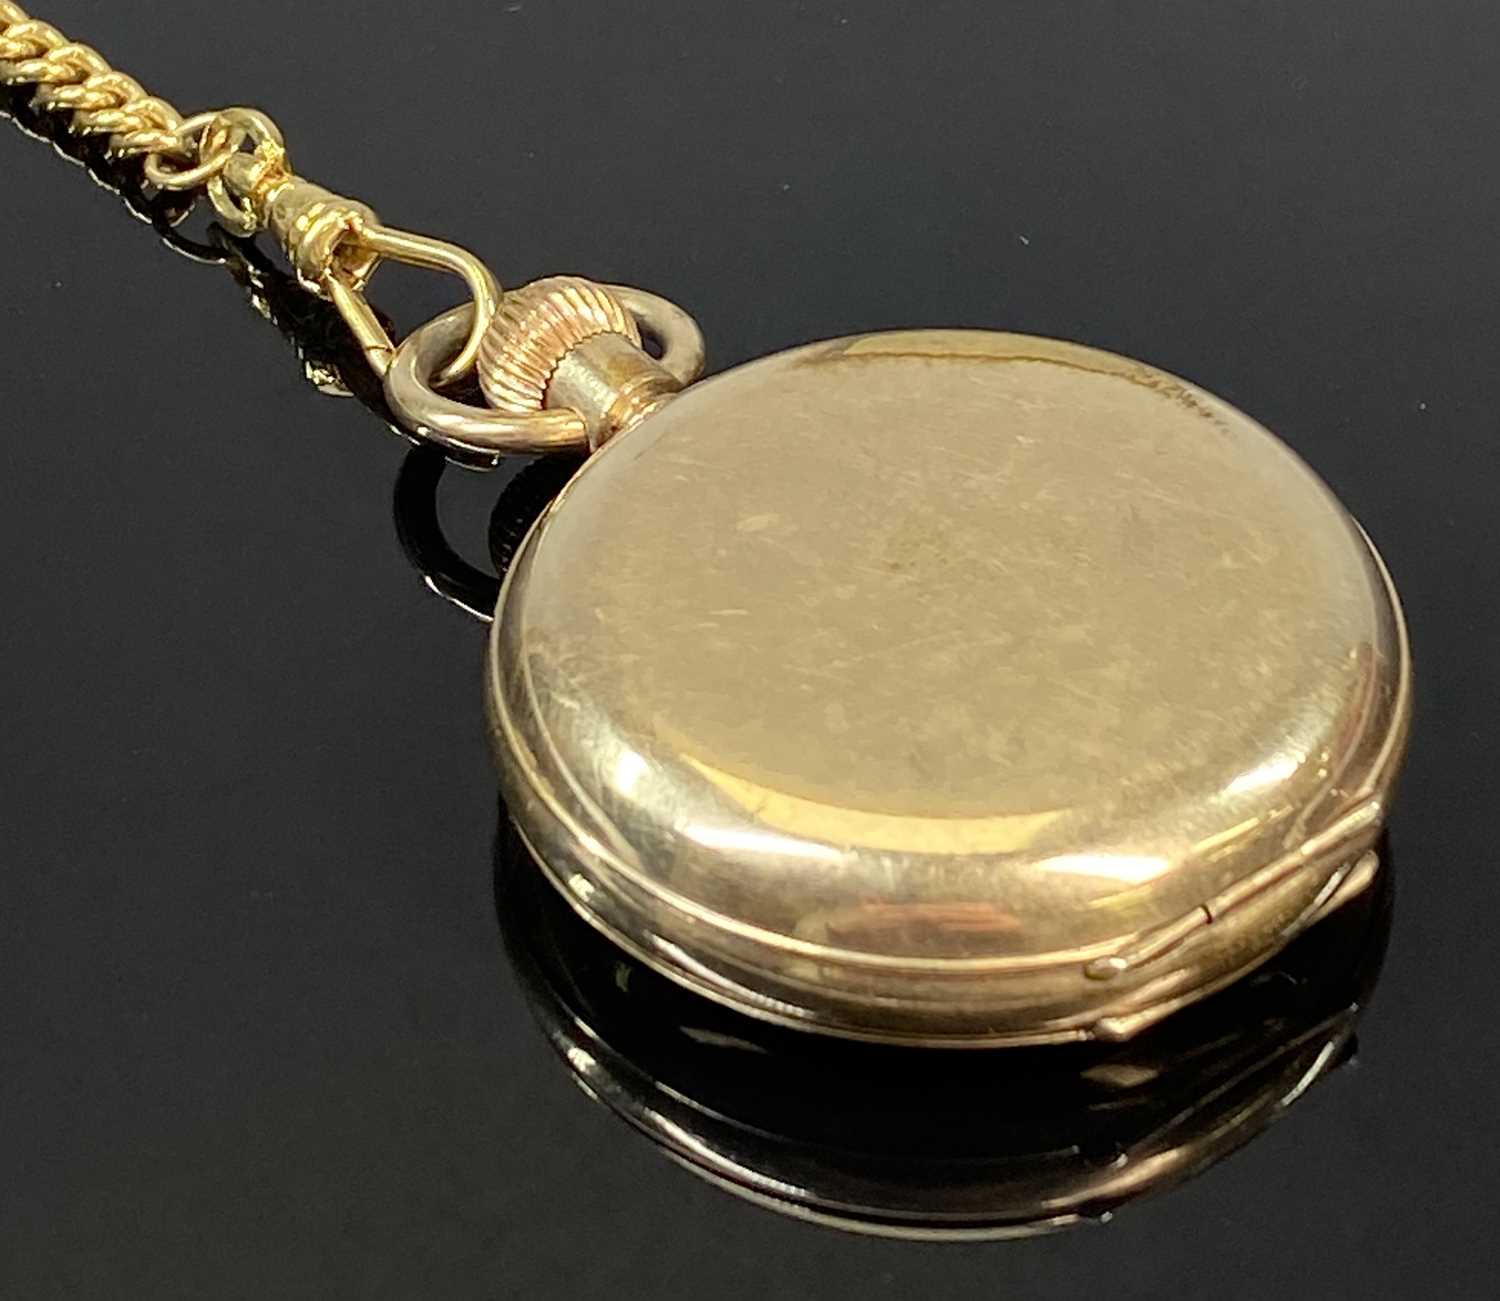 WELMAC GOLD PLATED FULL HUNTER POCKET WATCH, top wind, white enamel dial with black Roman numerals - Image 2 of 7